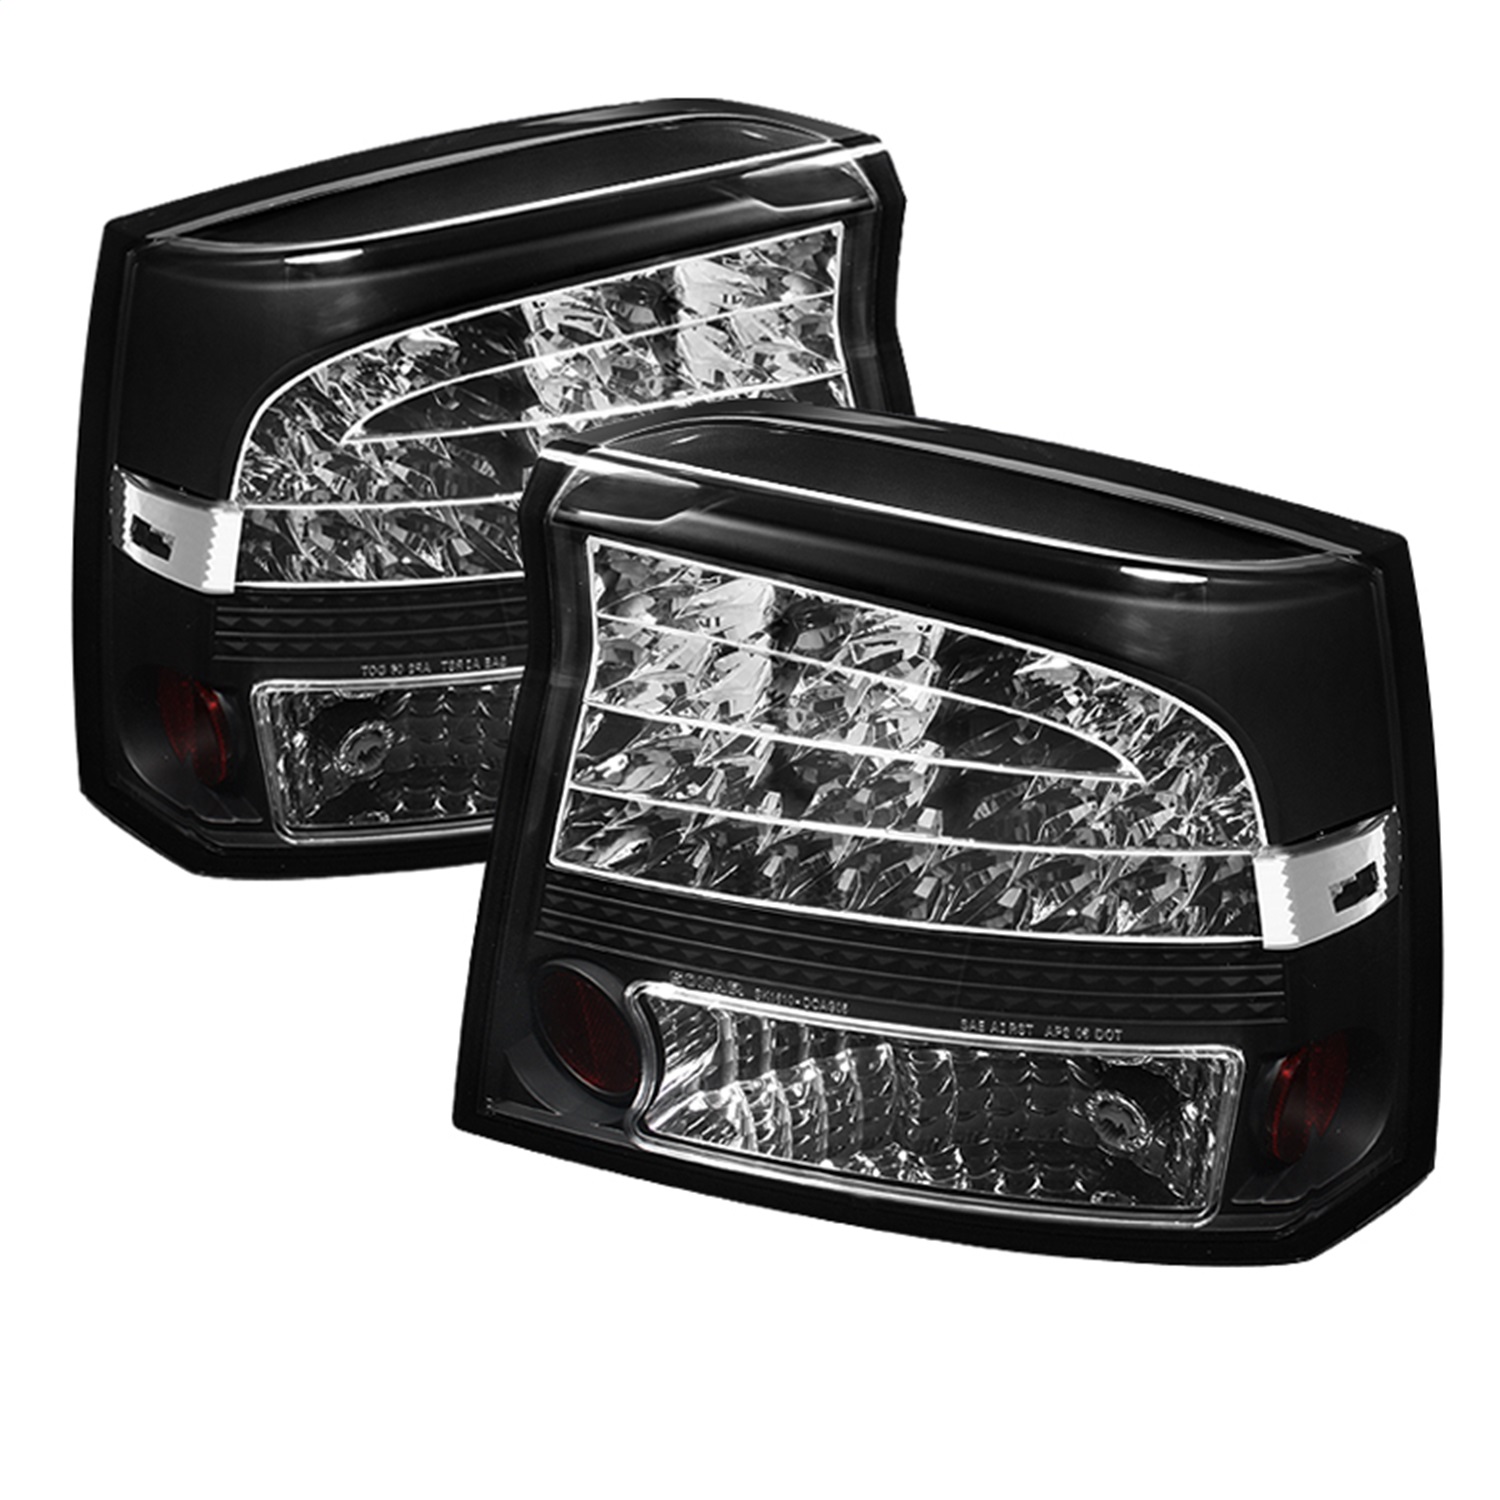 Spyder Auto 5031662 LED Tail Lights Fits 09-10 Charger